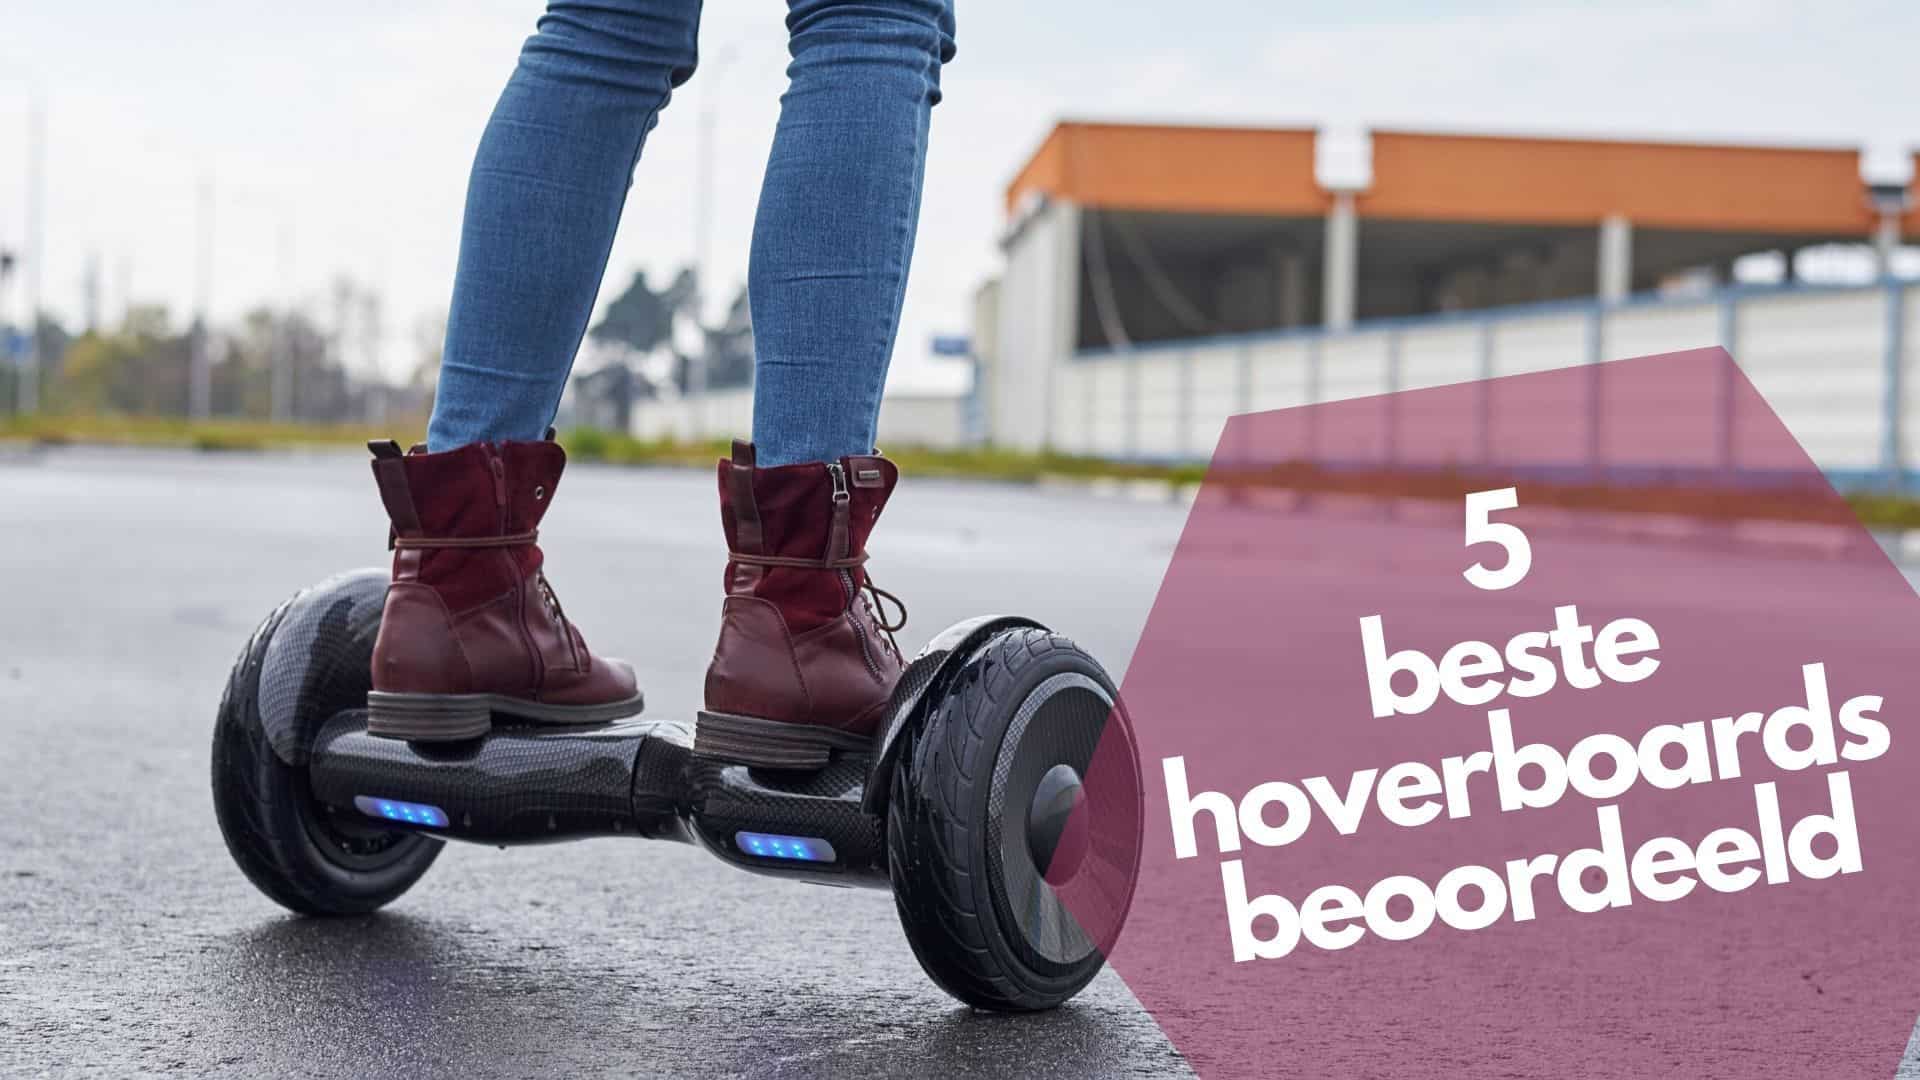 Best Hoverboards Reviewed: These 5 jumps from the test